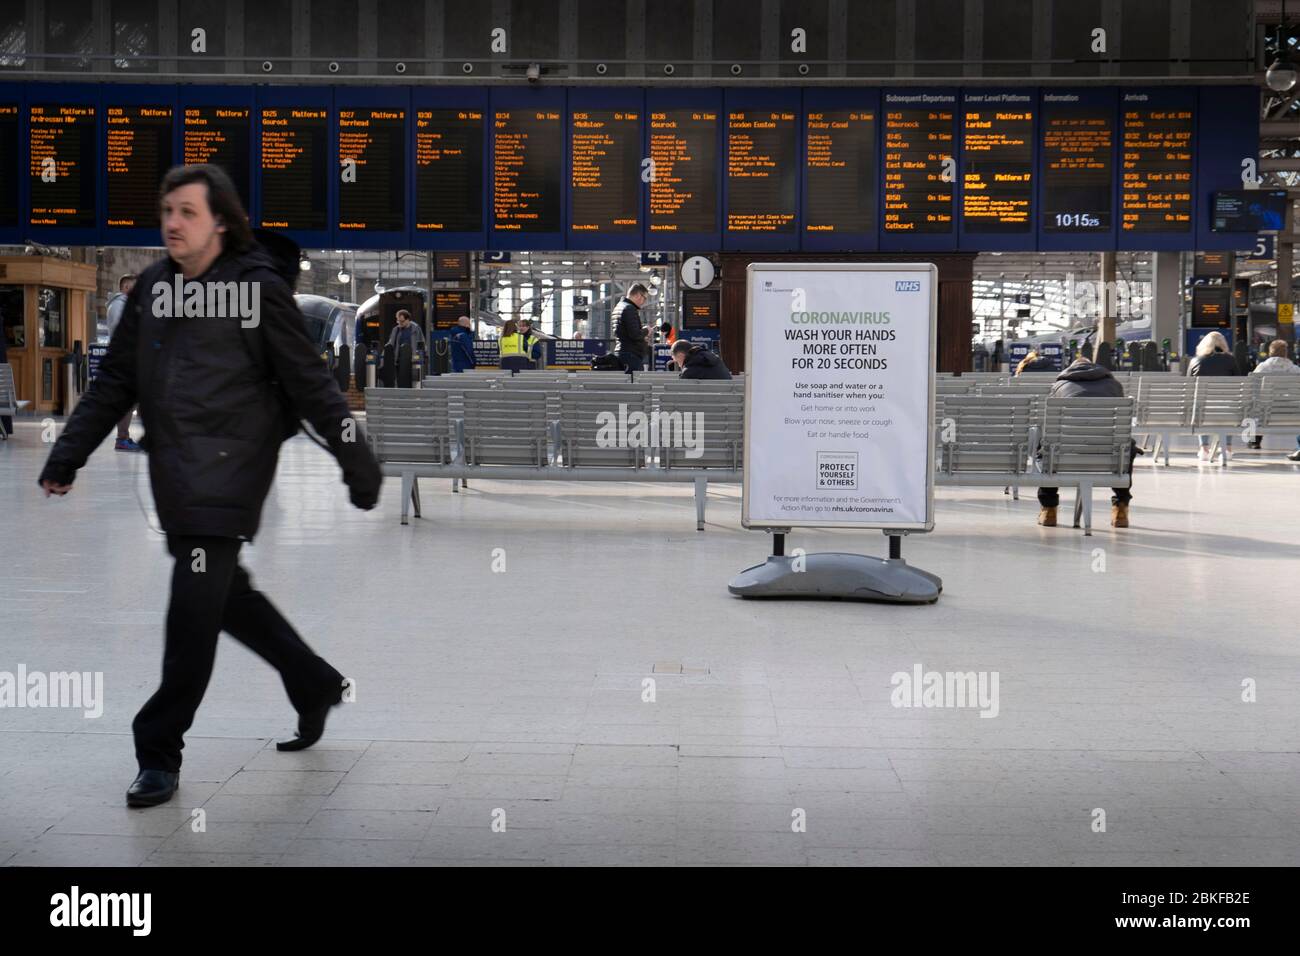 Government information sign in Glasgow's Central station during the Covid-19 lockdown. Stock Photo